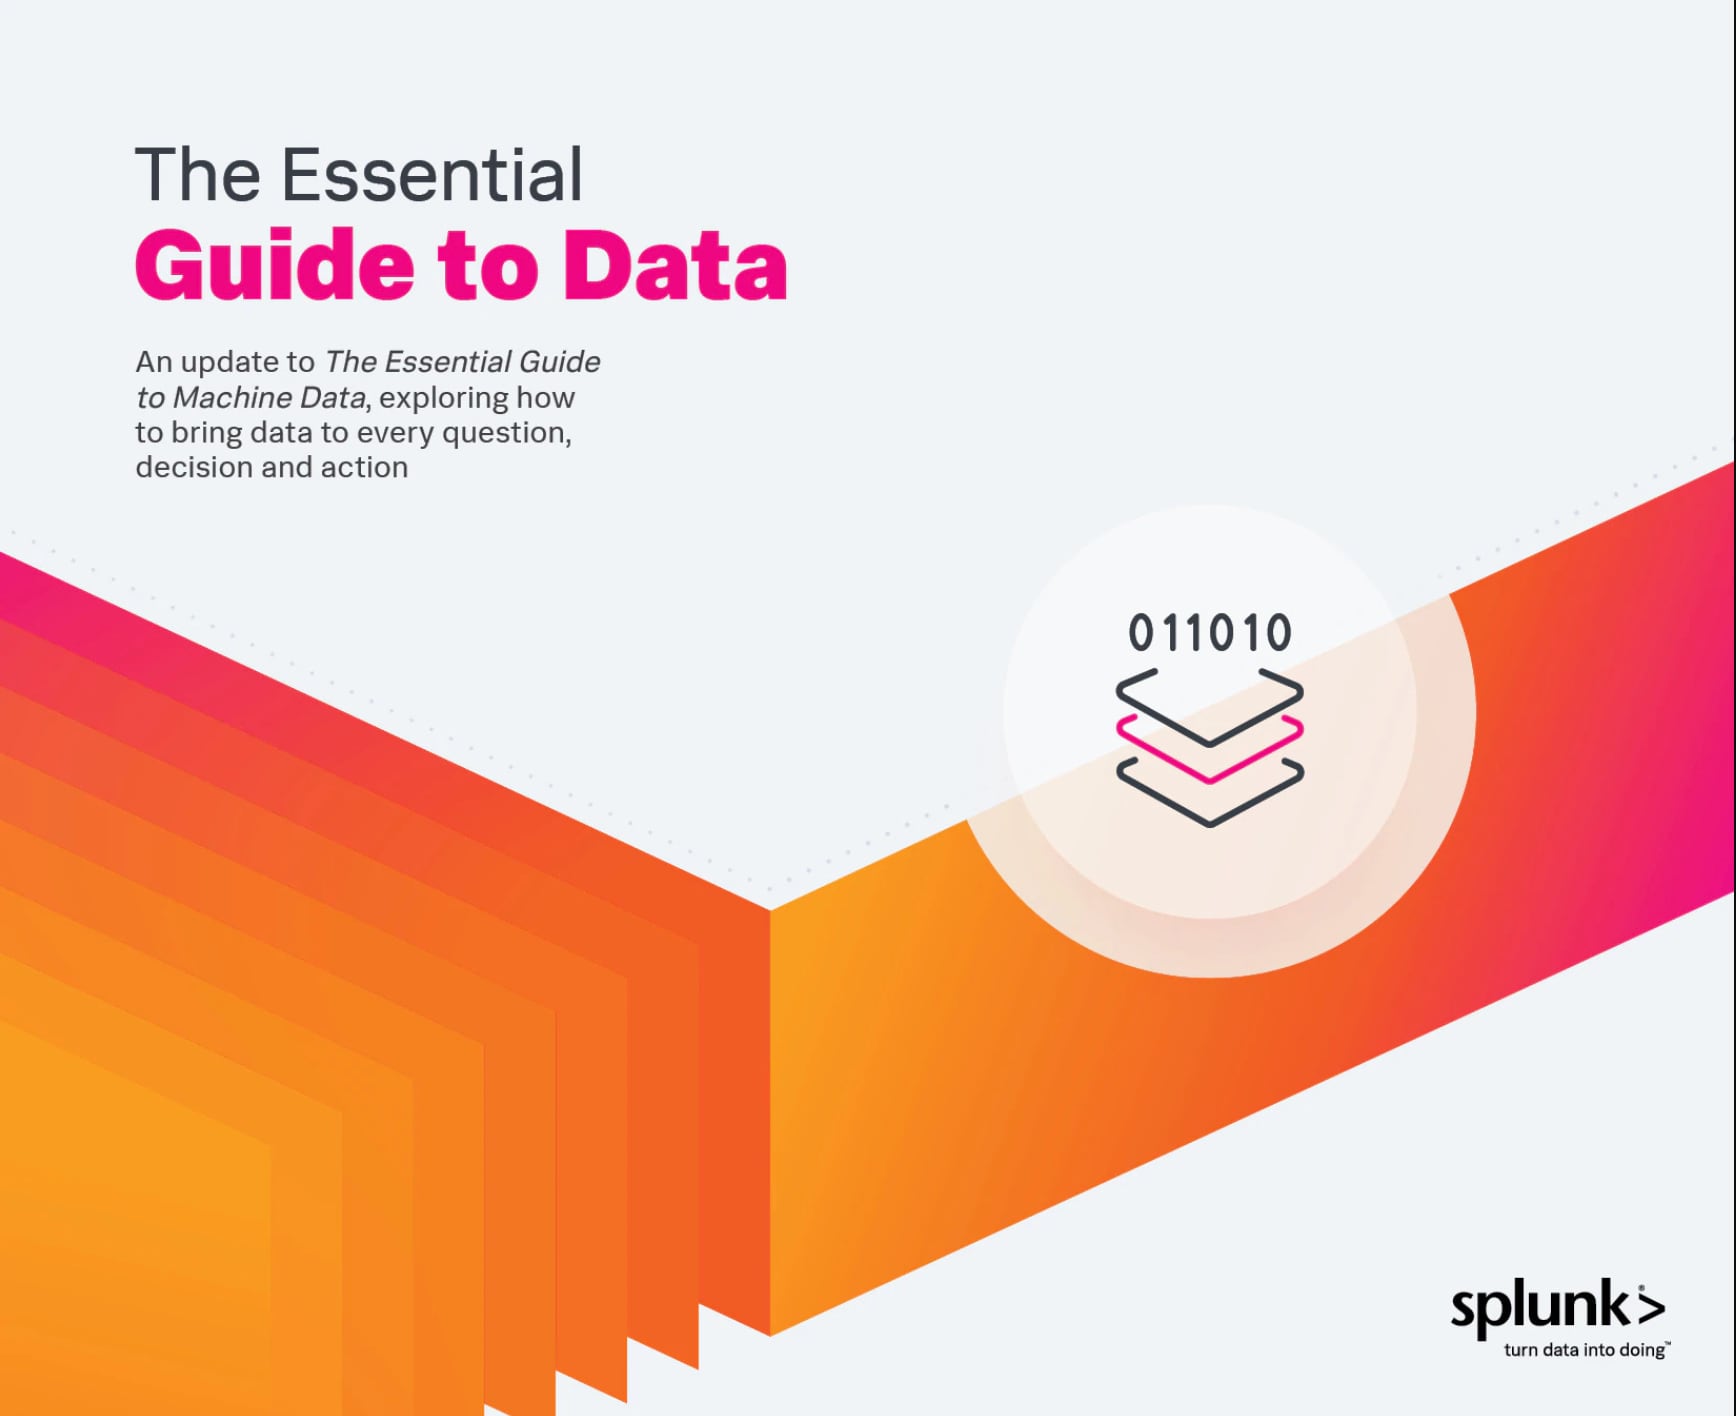 The essential guide to machine data